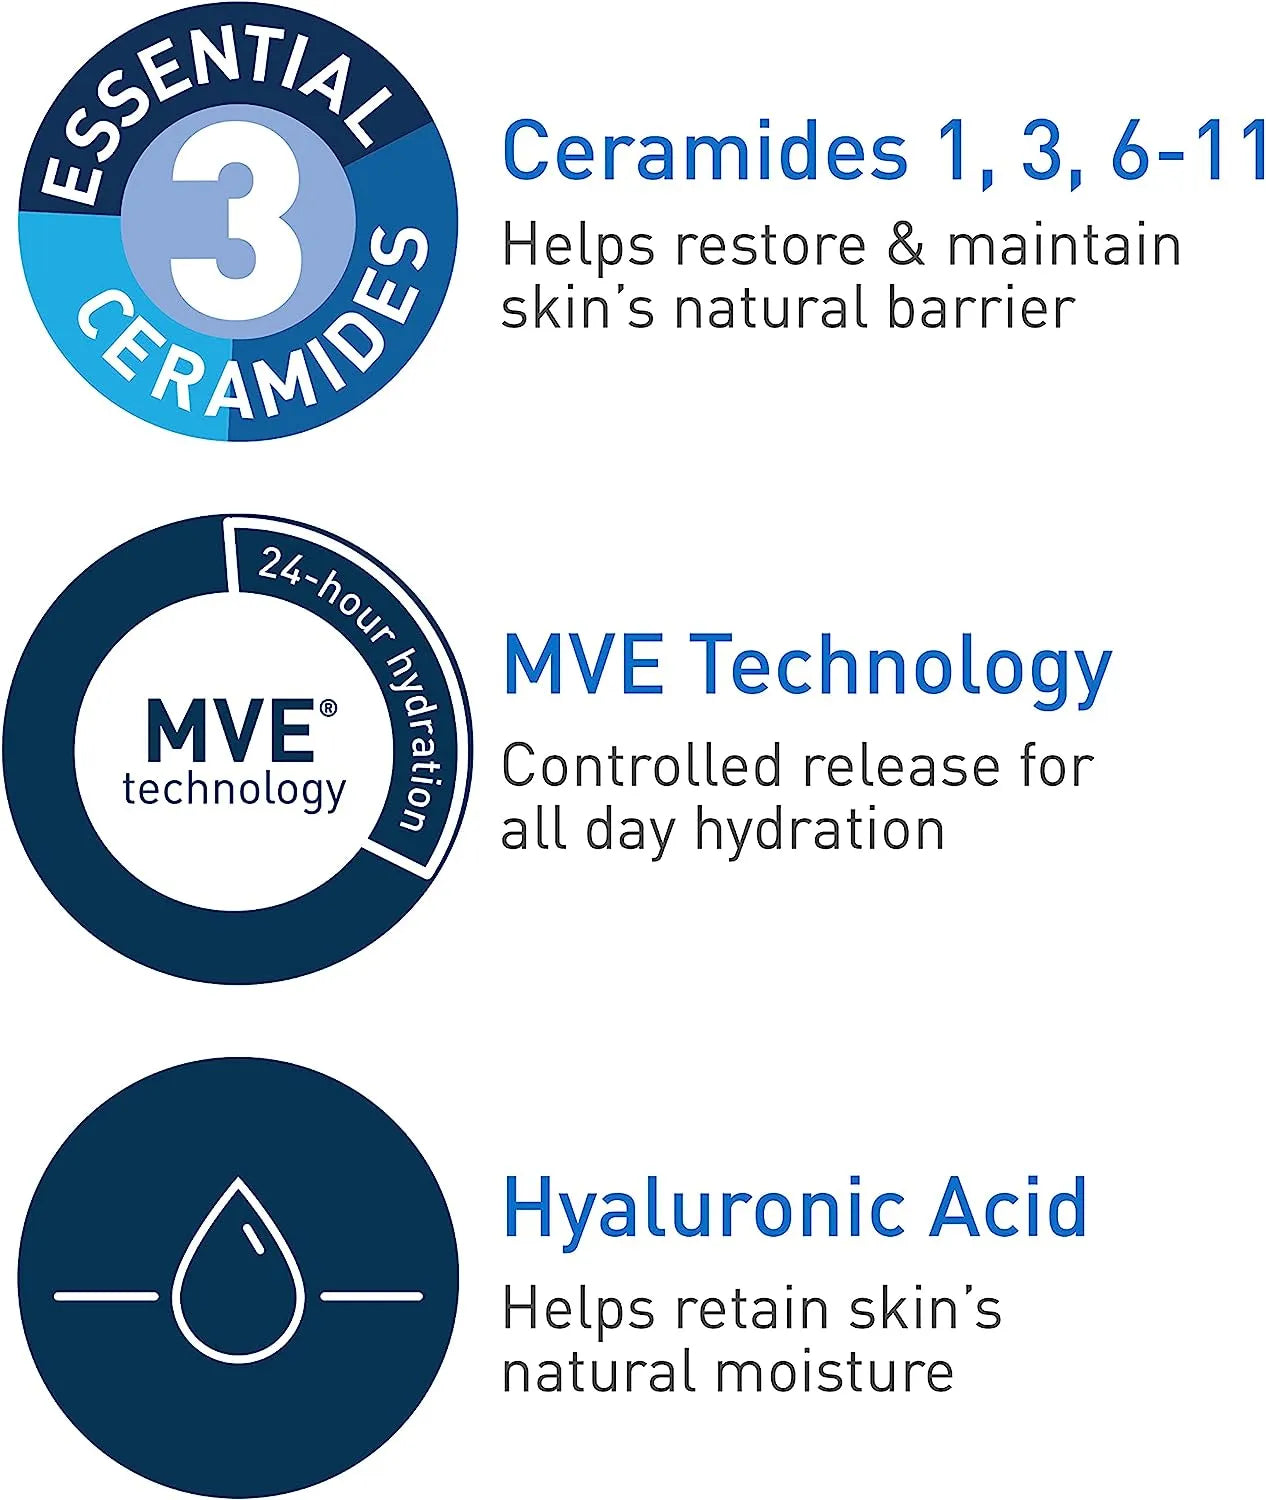  This dermatologist-developed lotion restores skin's barrier with ceramides & hyaluronic acid. CeraVe Daily Moisturizing Lotion 355ml - 3 Essential Ceramides & Hyaluronic Acid